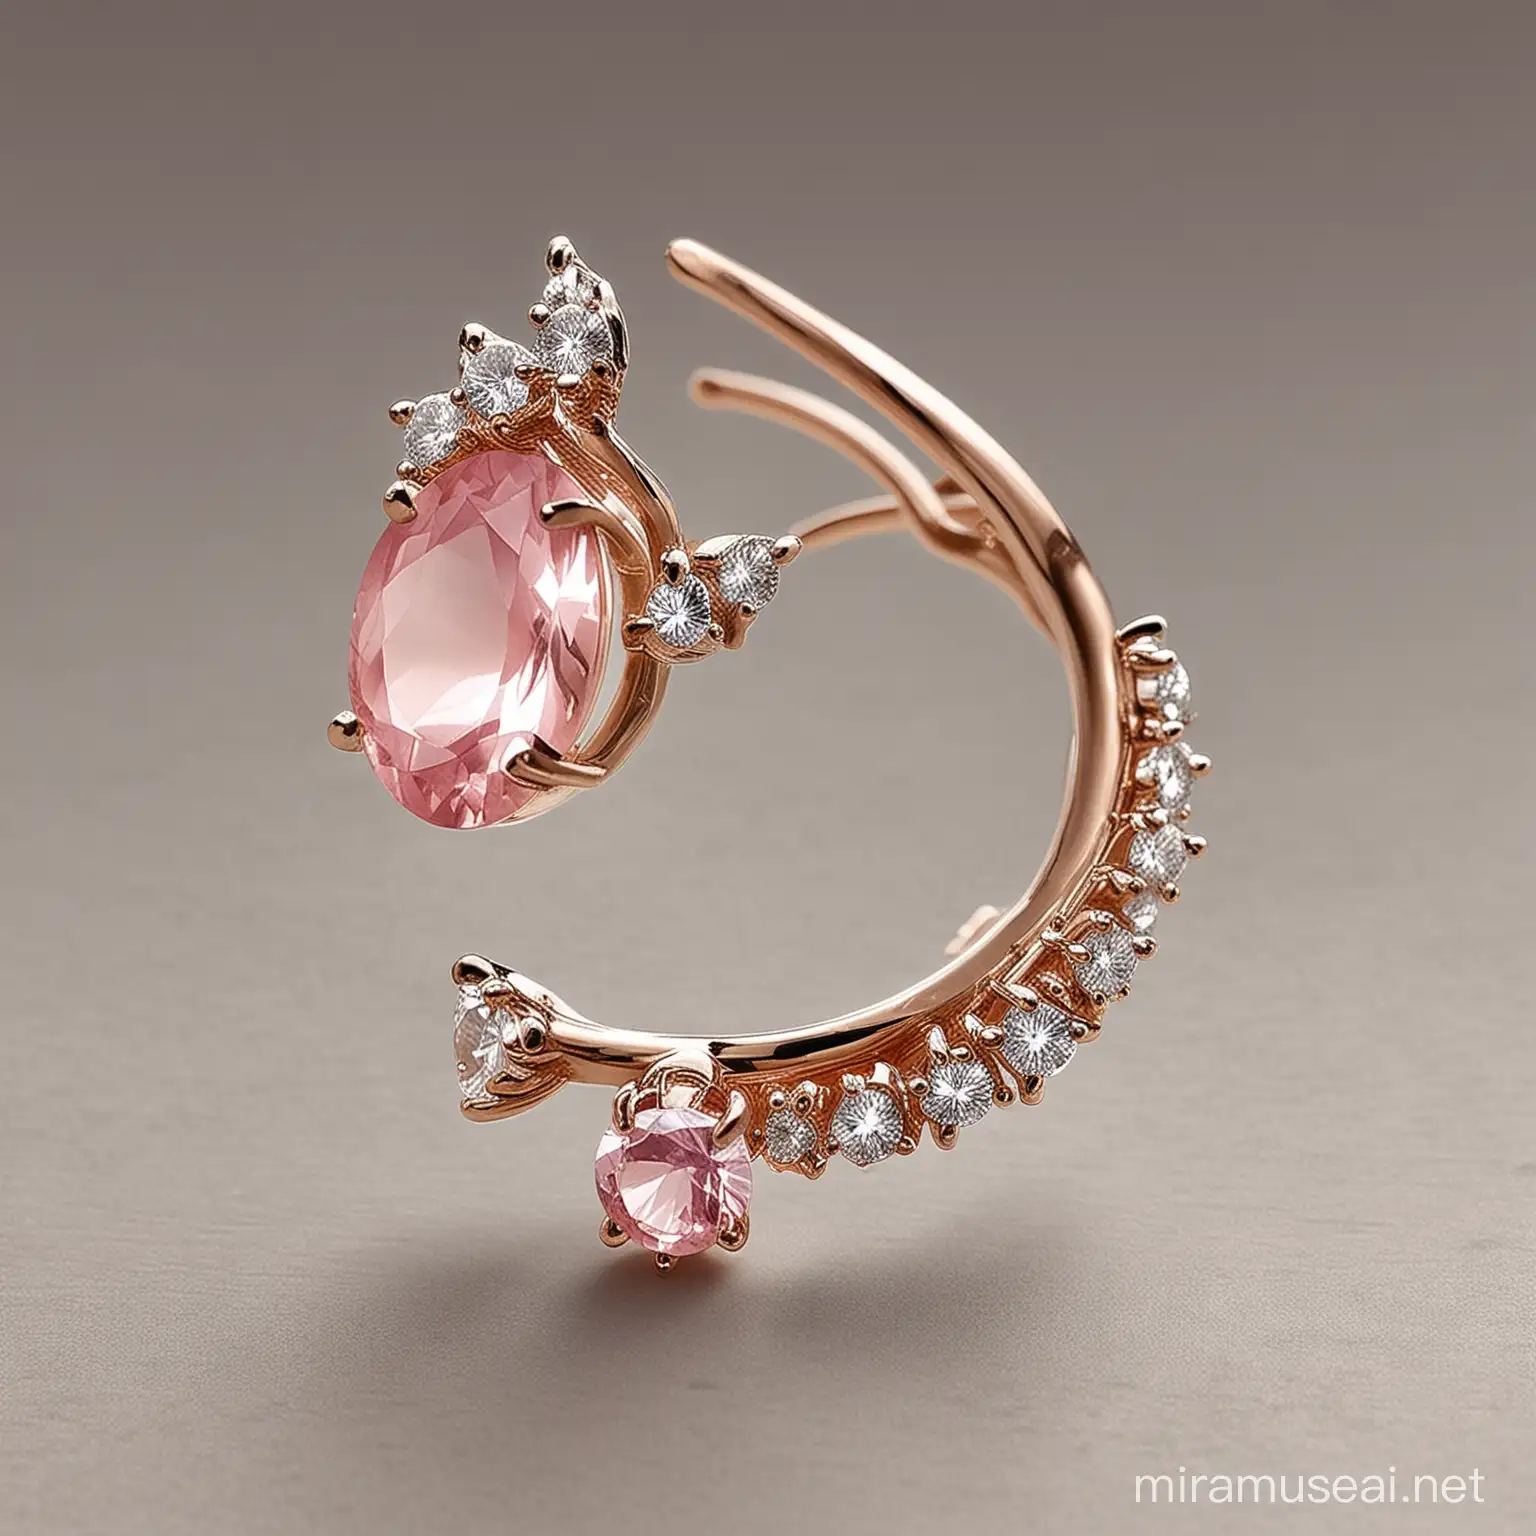 create ear cuff designs with pink quartz and diamond reference Shaun leane's style, more minimalistic style.